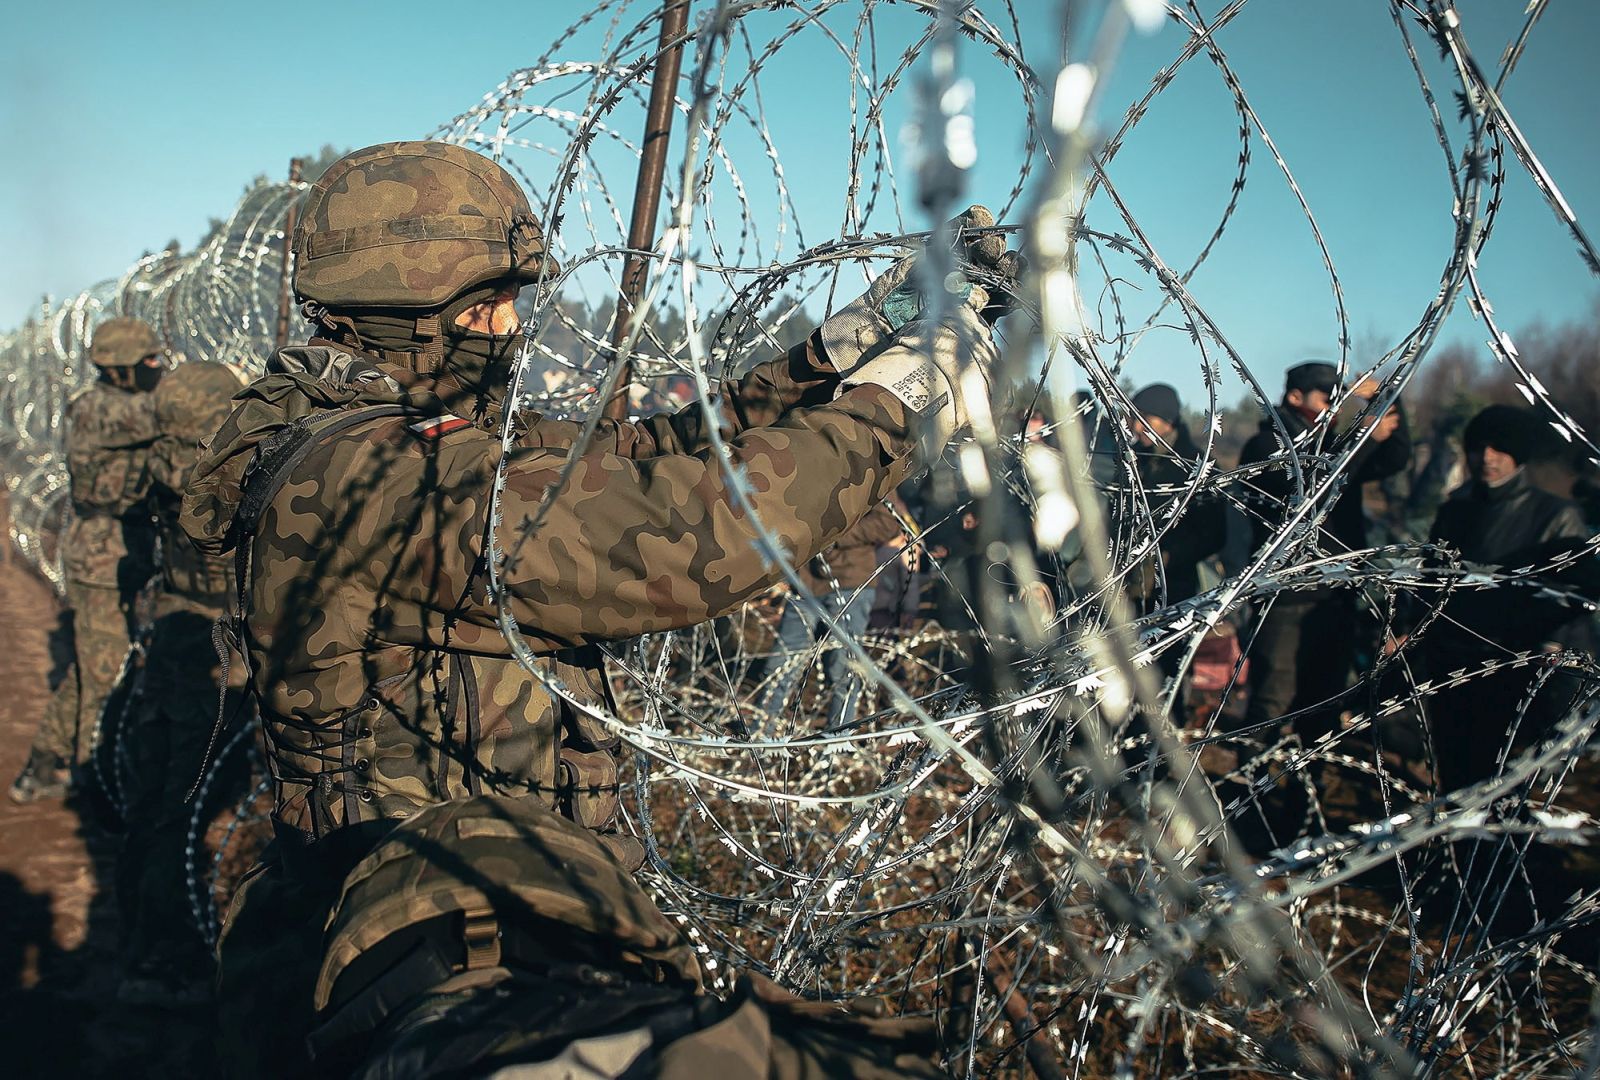 epa09578267 A handout photo made available by Polish Territorial Defence Force shows Polish soldiers guard the fence during 'Operation Strong Support' near the Polish-Belarusian border crossing in Kuznica, eastern Poland, 09 November 2021 (issued 12 November 2021). According to Polish Border Guard, over a thousand refugees, who want to obtain asylum in the European Union have been trapped at low temperatures at the border Polish-Belarusian border.  EPA/IREK DOROZANSKI / POLISH TERRITORIAL DEFENCE FORCE / HANDOUT POLAND OUT HANDOUT EDITORIAL USE ONLY/NO SALES